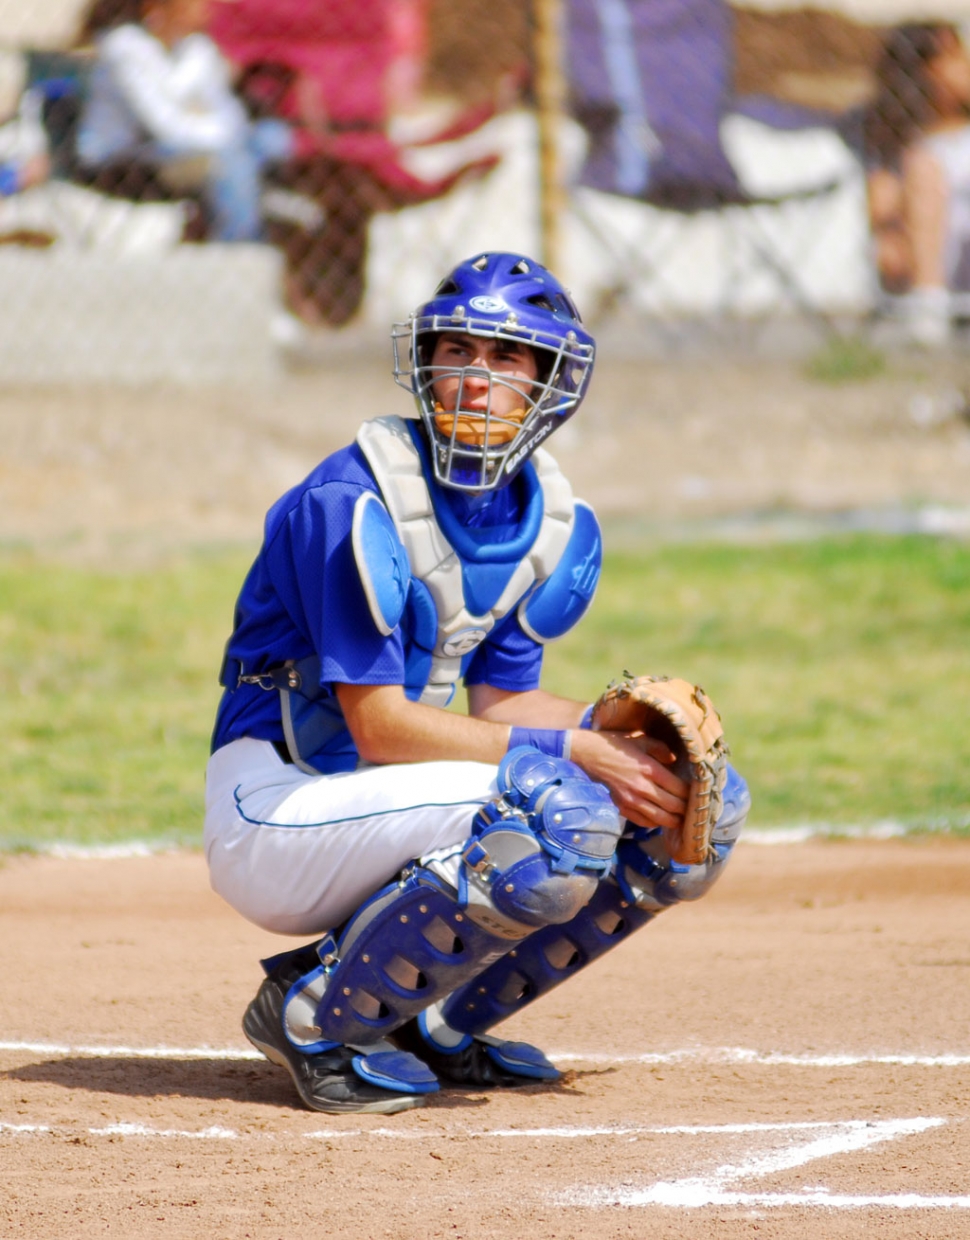 Michael Watson, catcher for the Flashes, played a great game against Santa Paula. Fillmore lost 2-1.